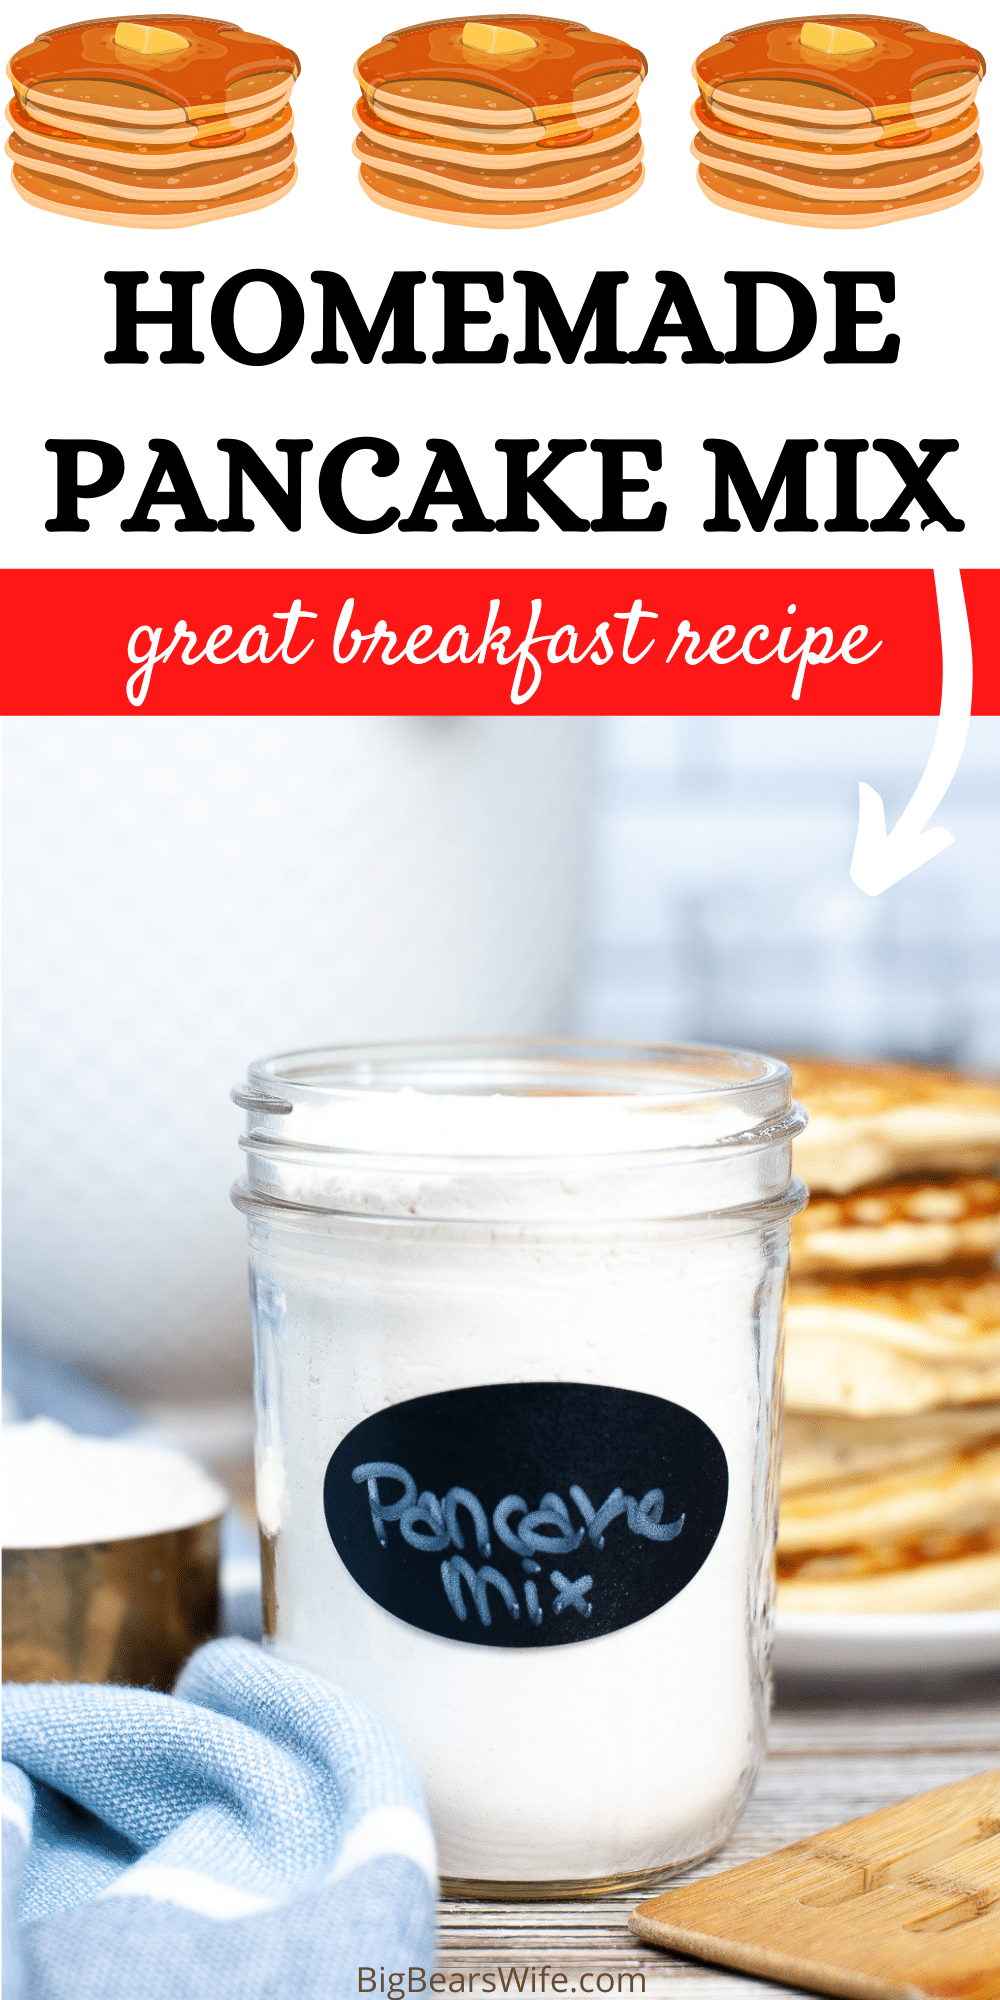 Morning pancakes made with homemade pancake mix is the perfect way to start off the day! This pancake mix is easy to make with simple ingredients and can be stored for about 5-6 months!  via @bigbearswife